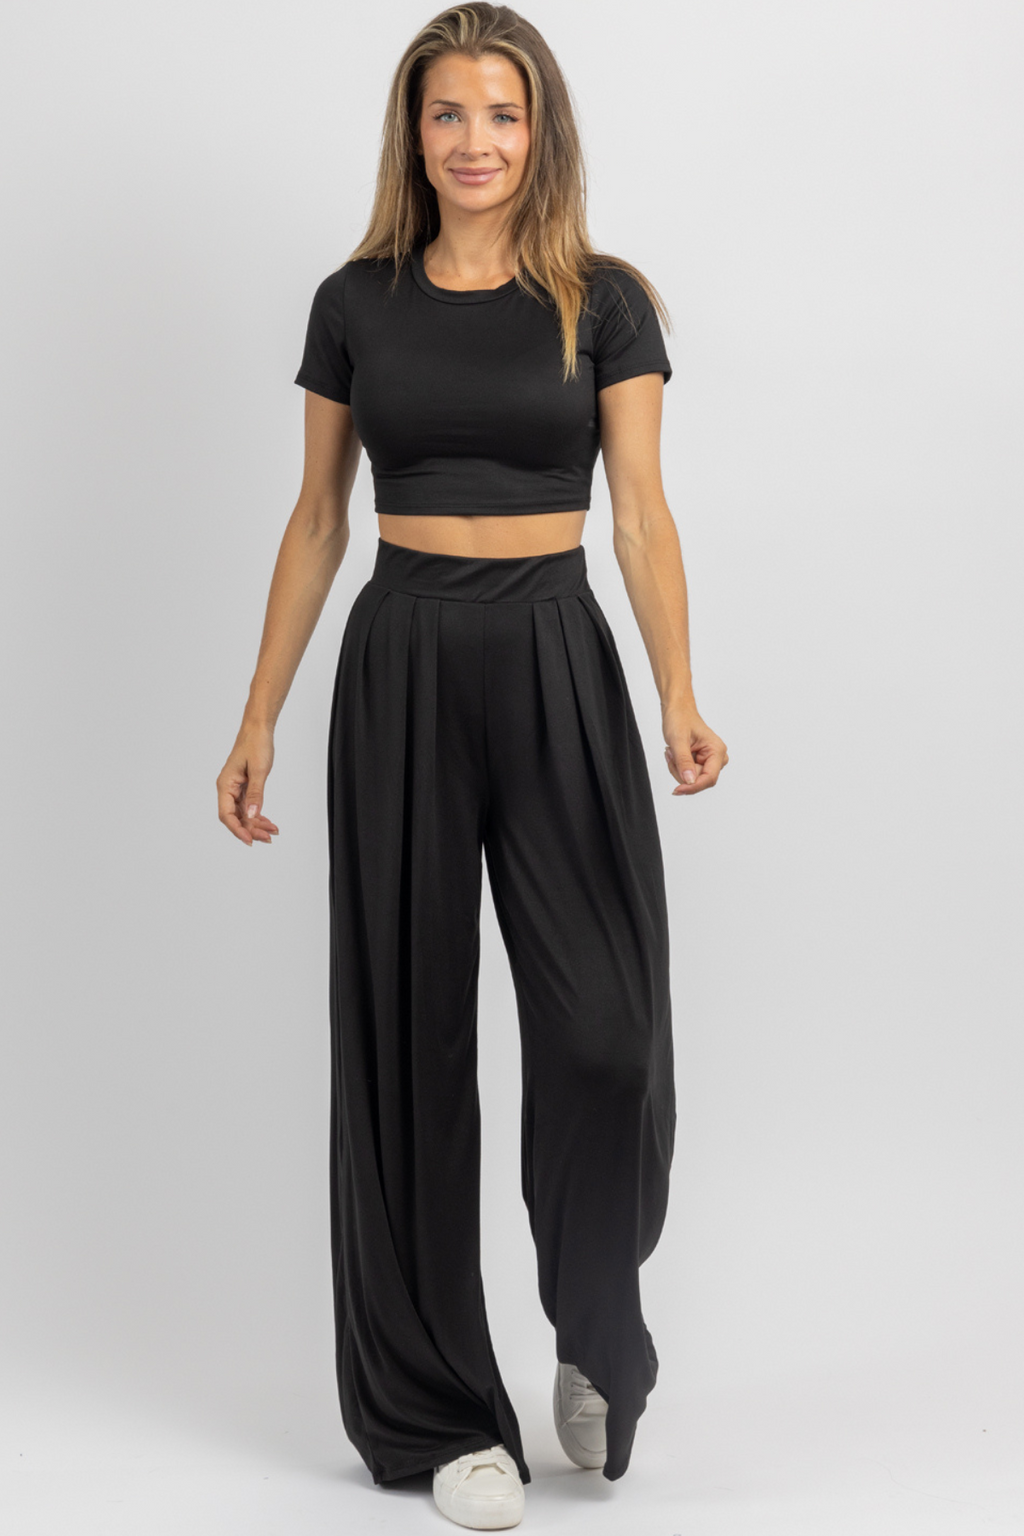 BUTTER SOFT BLACK PALAZZO PANT SET *RESTOCK COMING SOON*